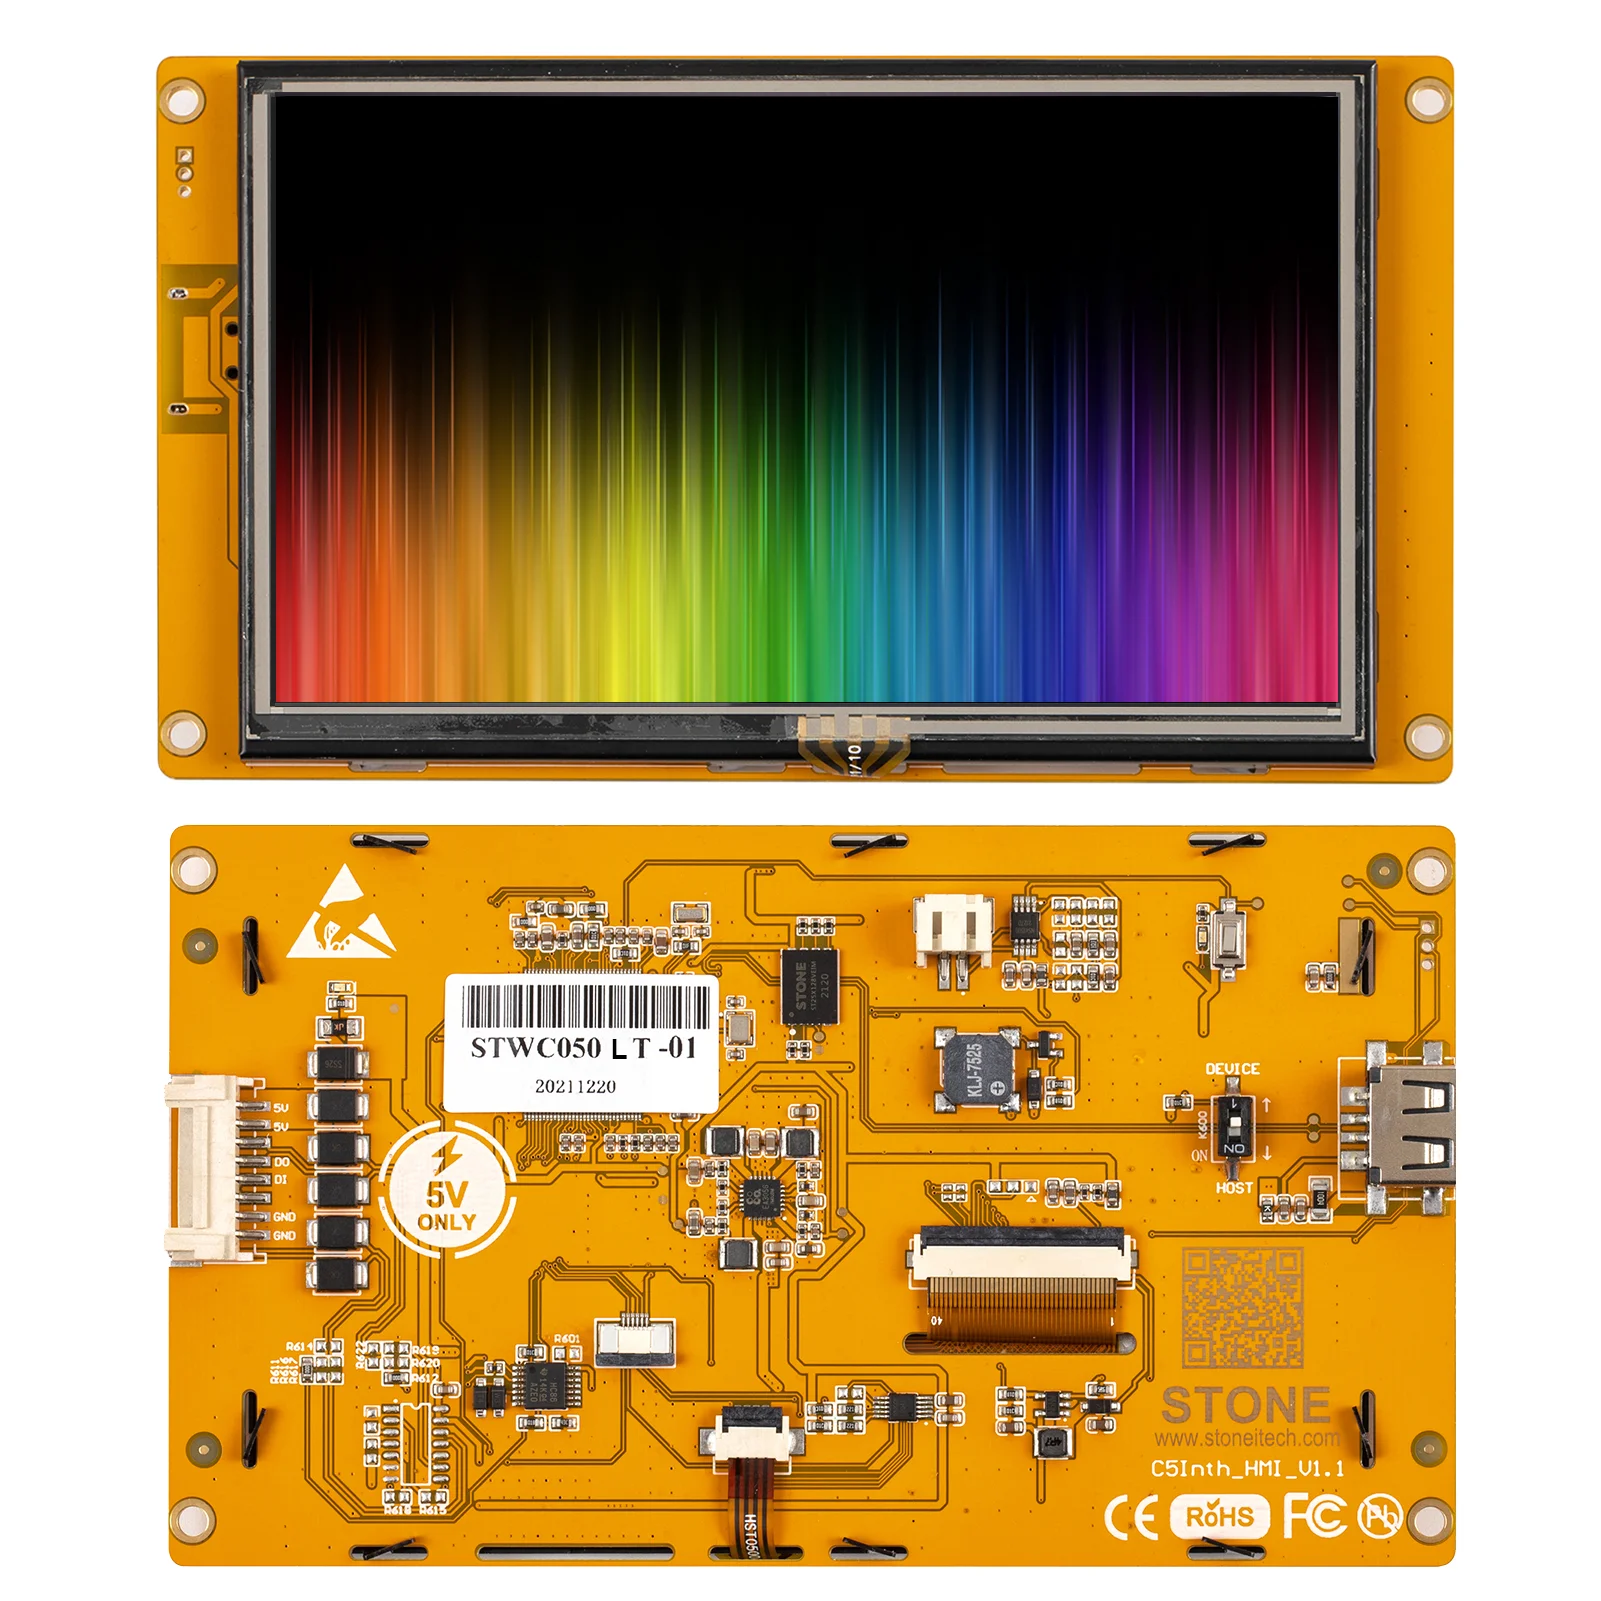 SCBRHMI C Series 5” Resistive Touchscreen Smart HMI TFT LCD Module with A Class Industry Panel